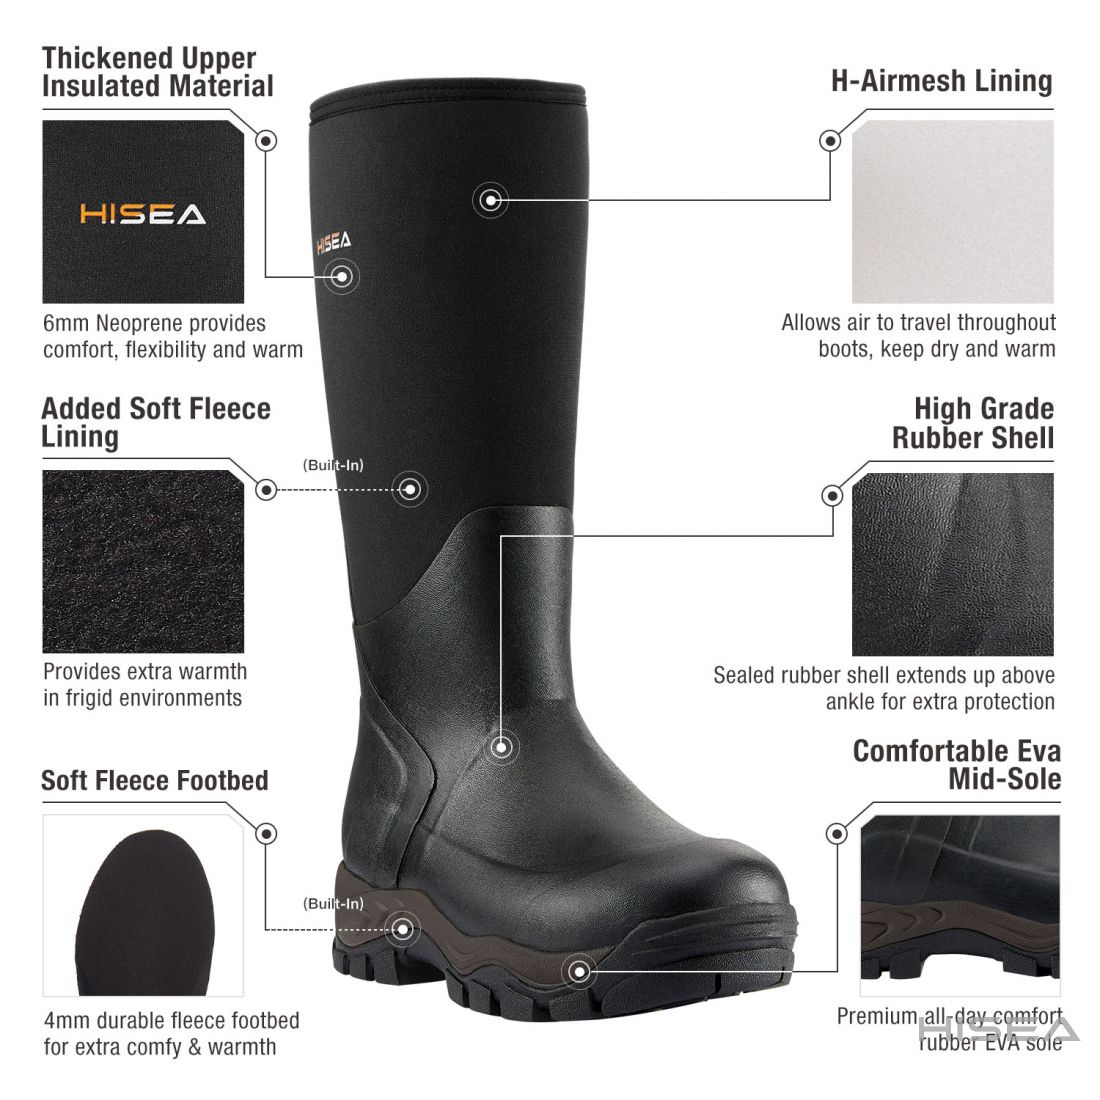 Men's Insulated Rubber Snow Boots | HISEA